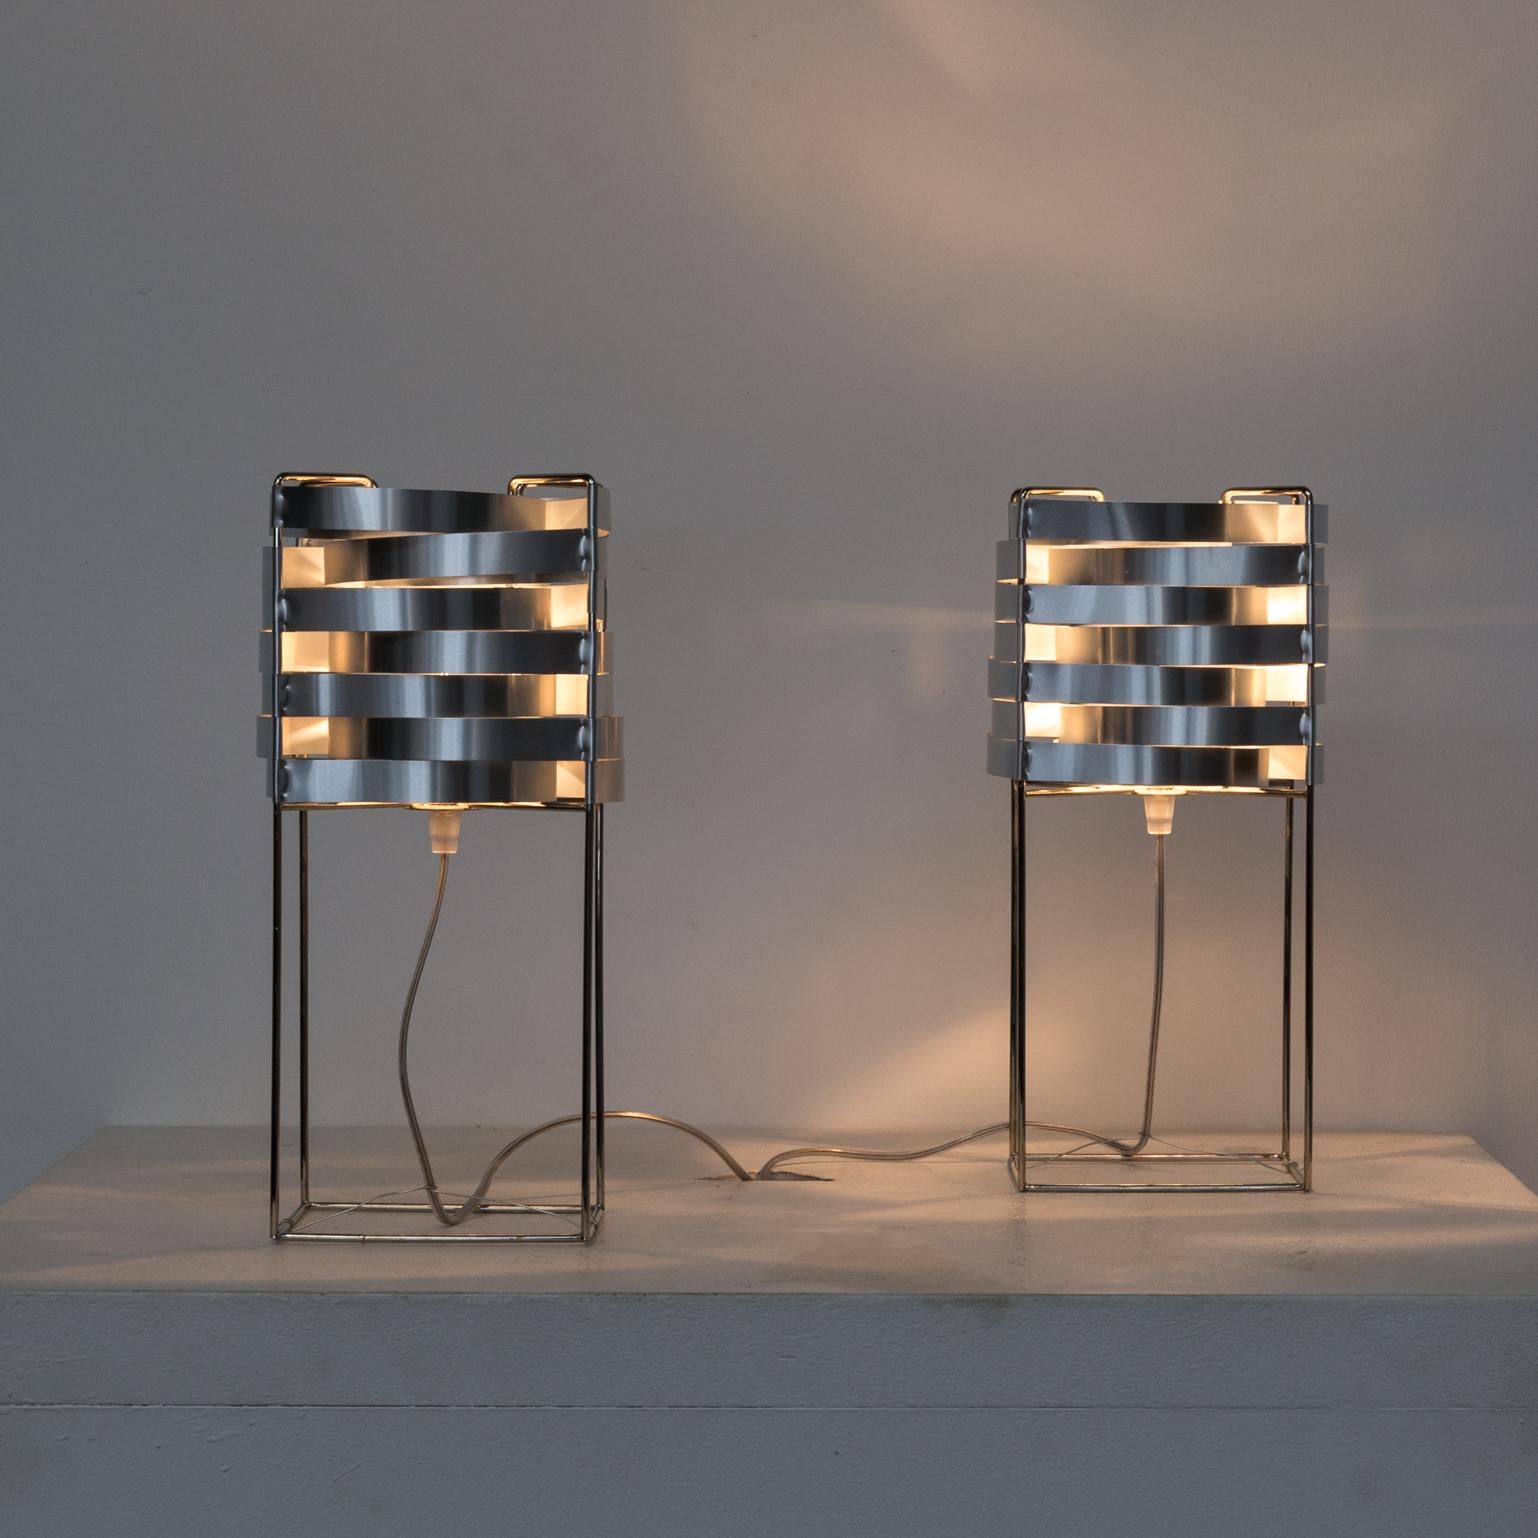 1960s Sebastien Sauze ‘Ganymede’ table lamp for Max Sauze set of 2. Bent aluminium sheet on steel structure, Ganymede table lamps are made from original late 1960s Max Sauze design by his son Sebastien Sauze, all Sauze genuine lighting fixtures are